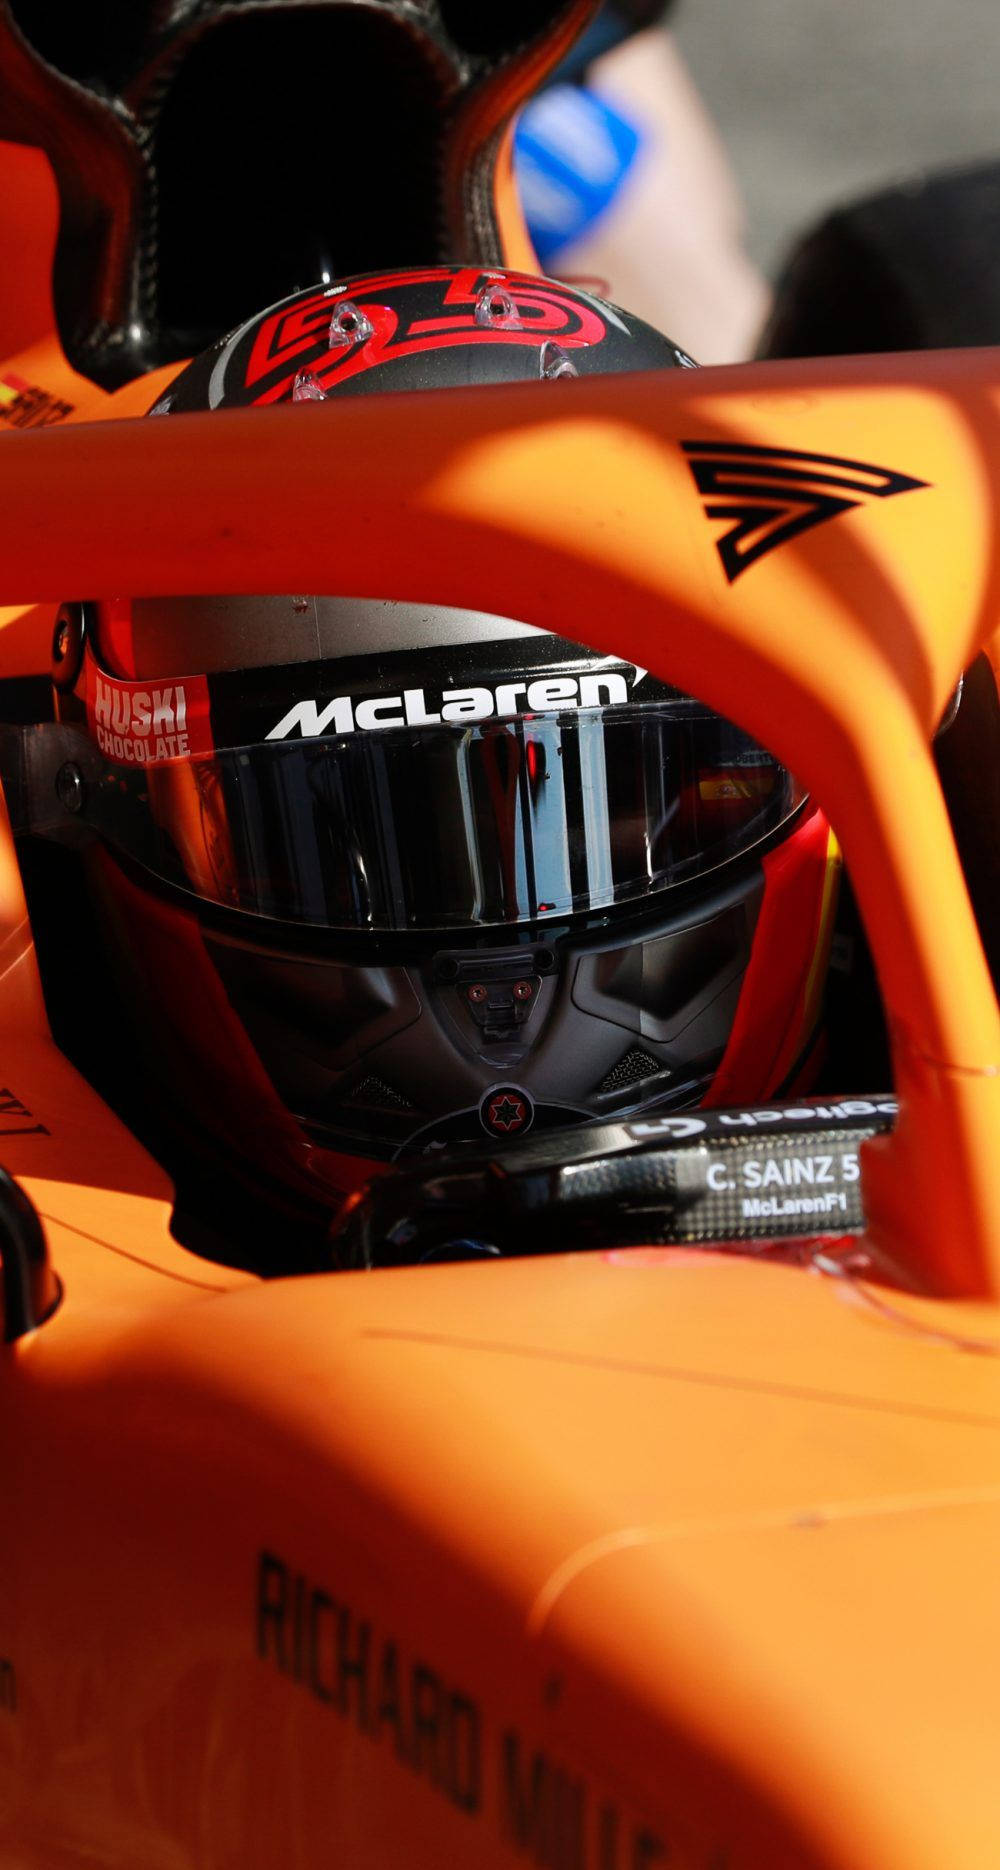 F1 Star Daniel Ricciardo Equipped With His Helmet In His Racing Vehicle Background